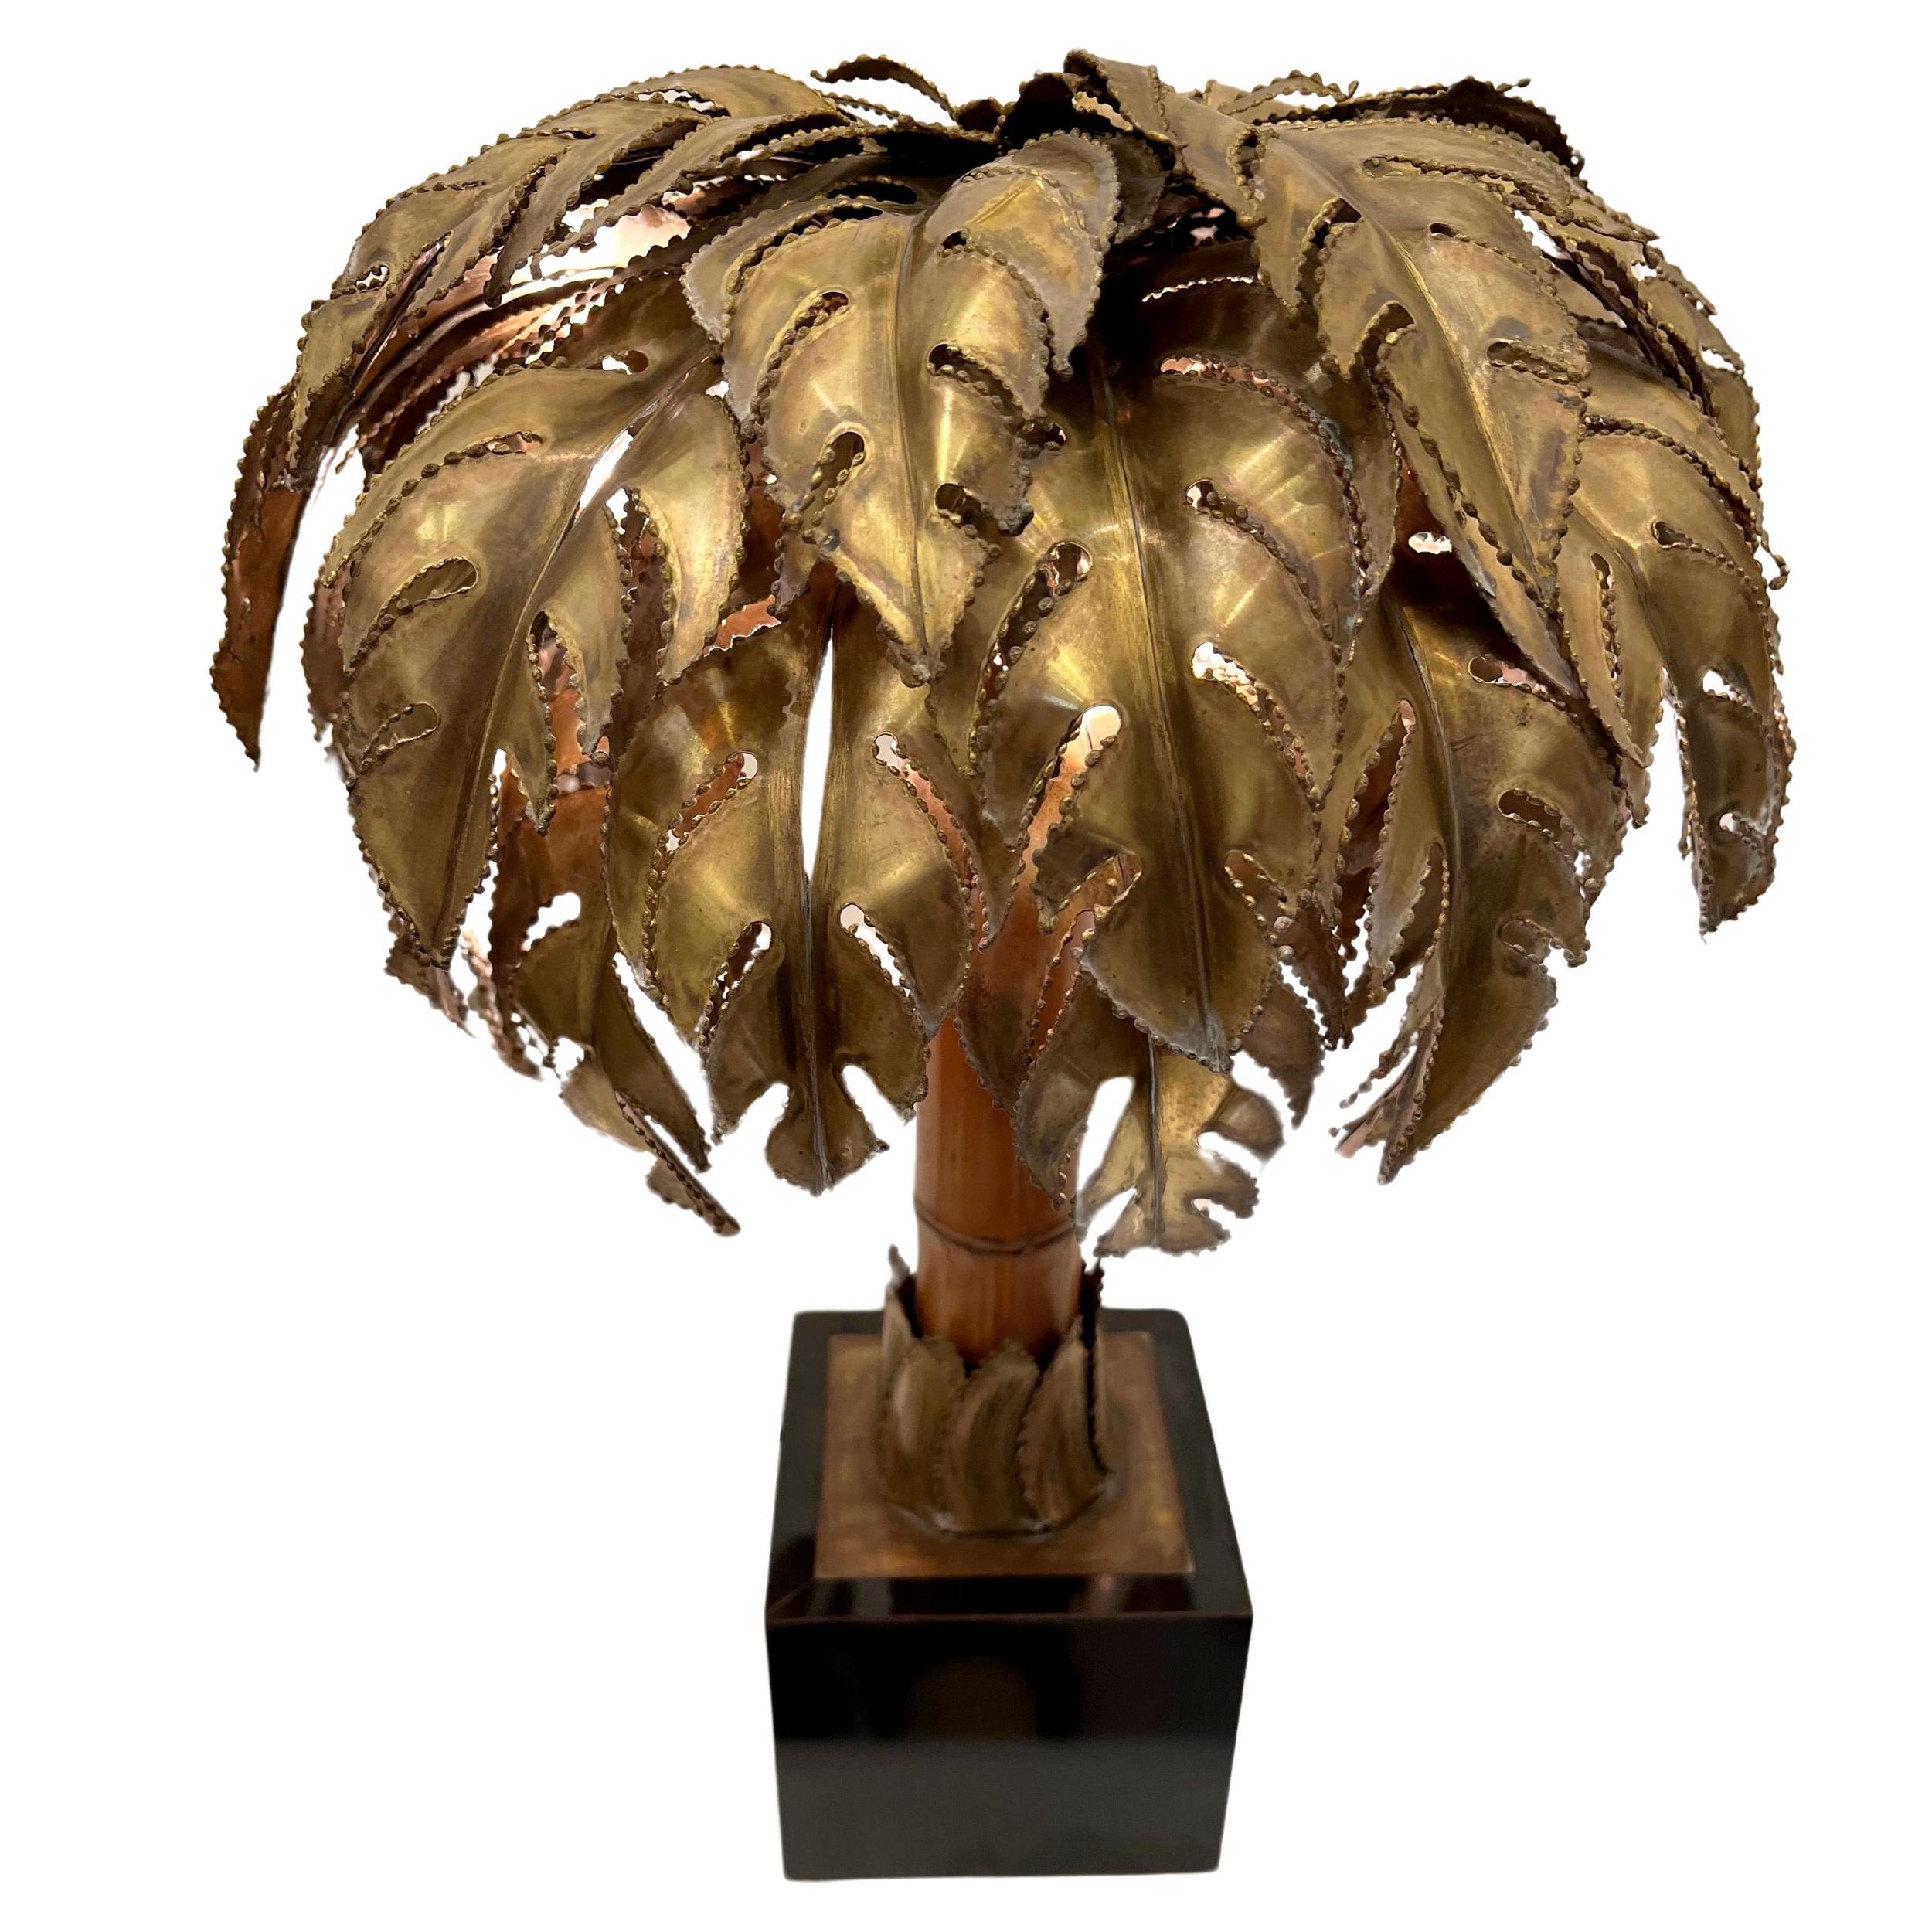 Small « palm tree » lamp by Christian Techouyeres for Maison Jansen.
The palm tree head is in cut brass, the trunk in bamboo. It is set in a black melamine and brass planter, weighted with lead inside for stability.
Four lights.